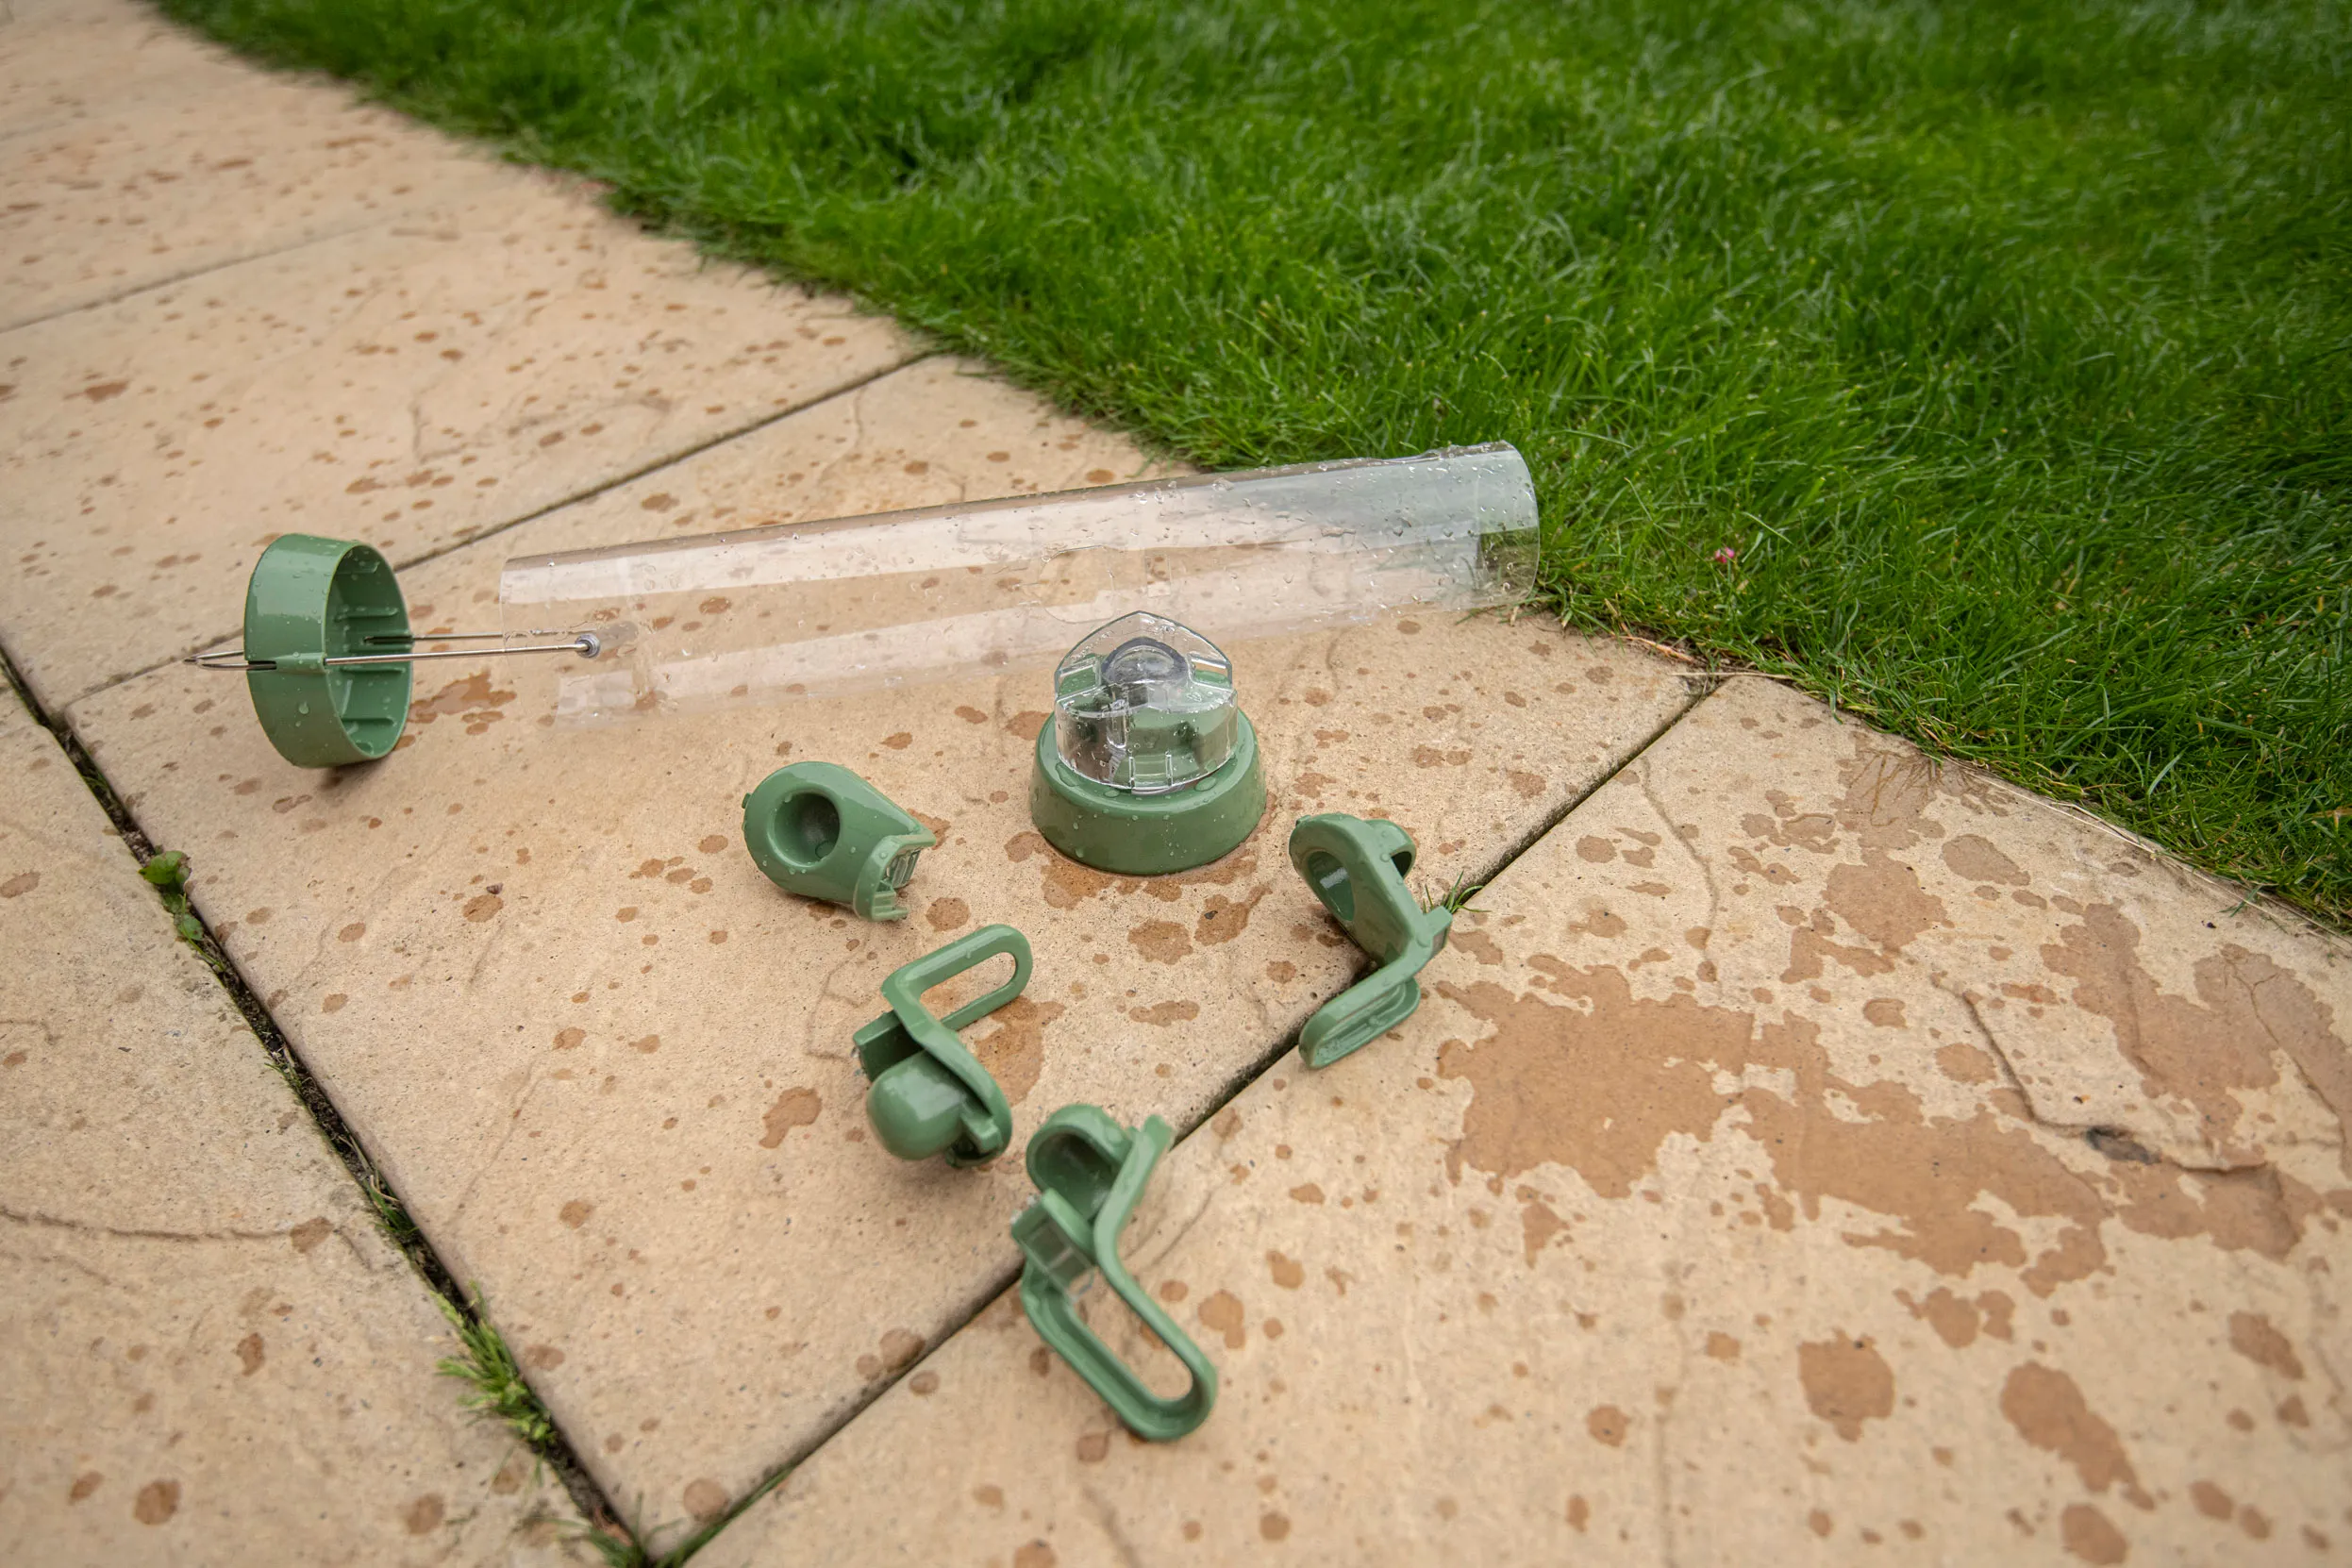 All the parts of a domestic bird feeder laid over concrete garden slabs, next to the grass, to dry.